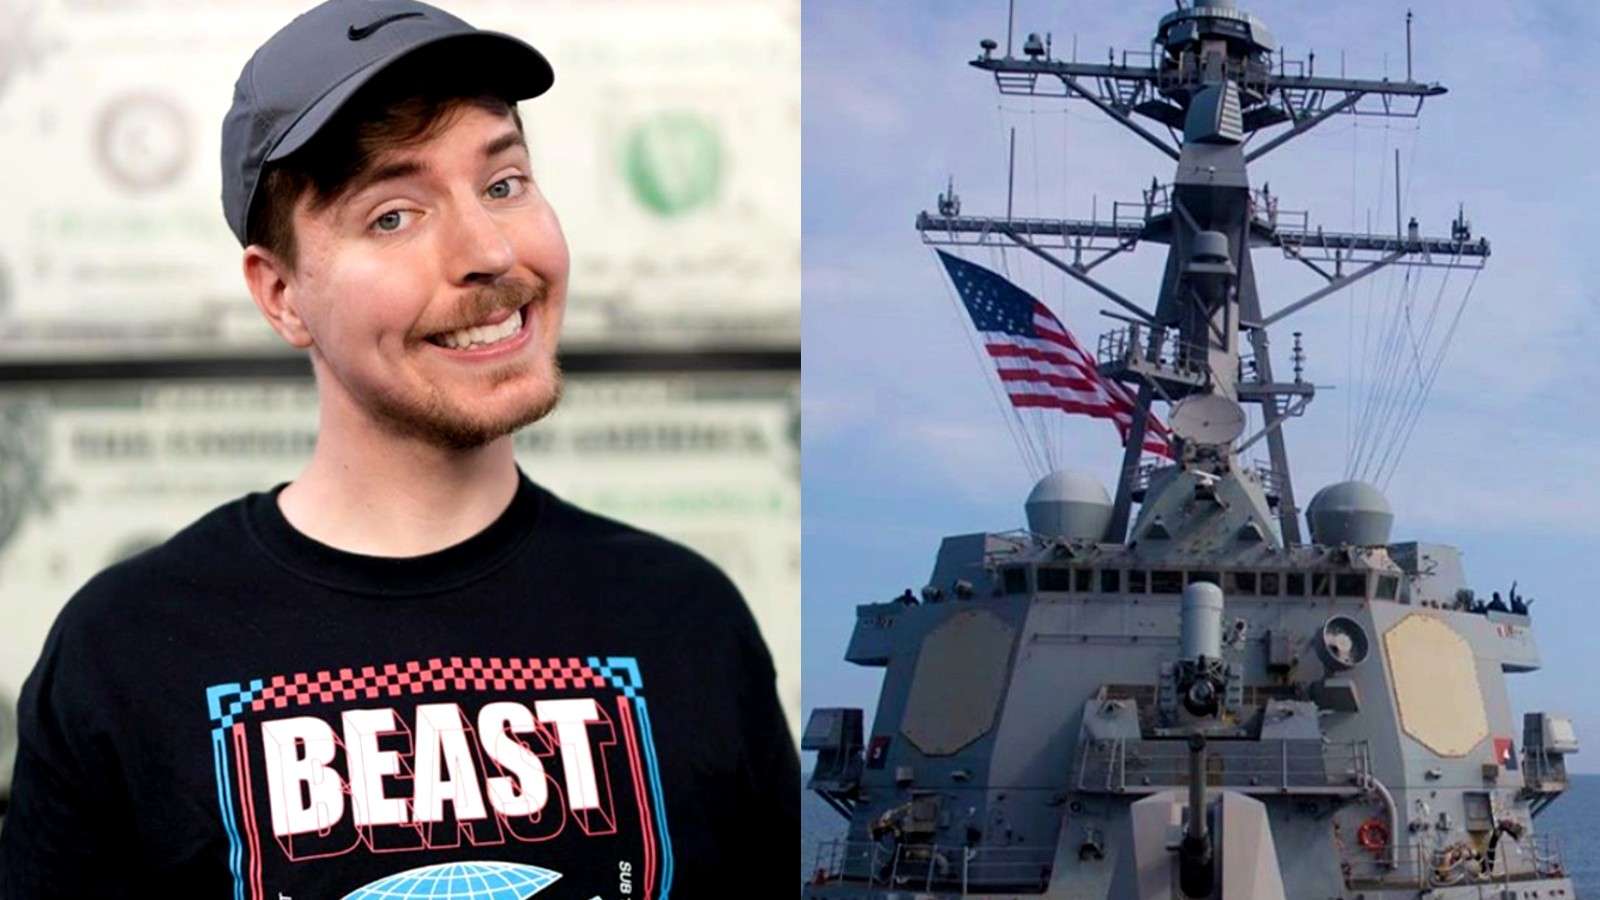 Image of Mr Beast standing next to image of US Navy ship